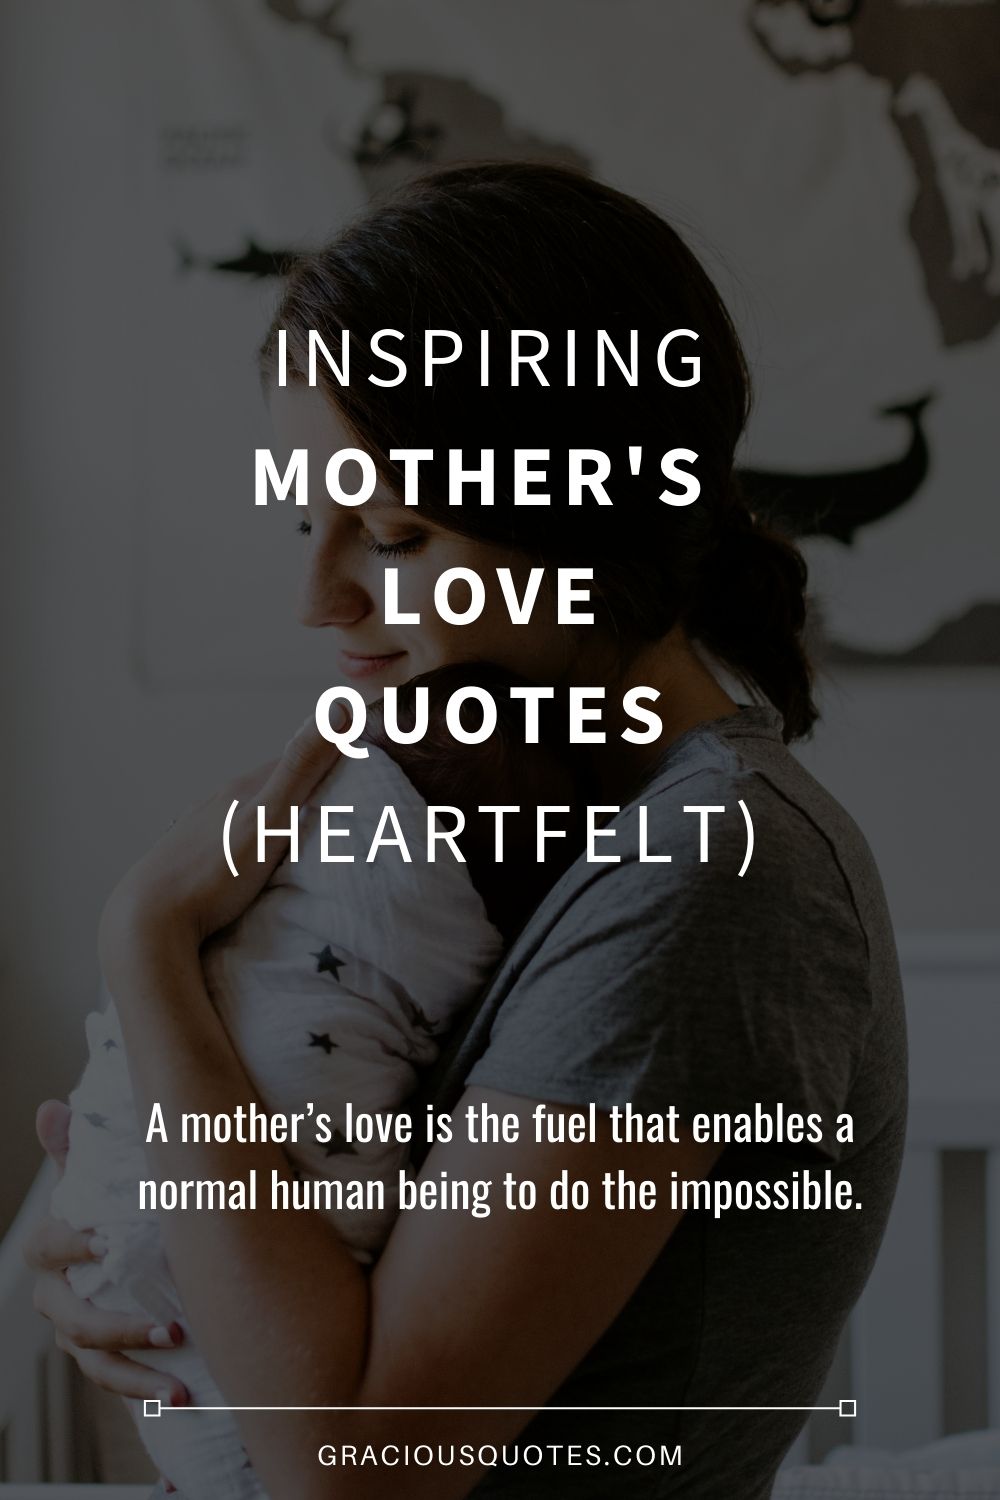 Inspiring Mother's Love Quotes (HEARTFELT) - Gracious Quotes